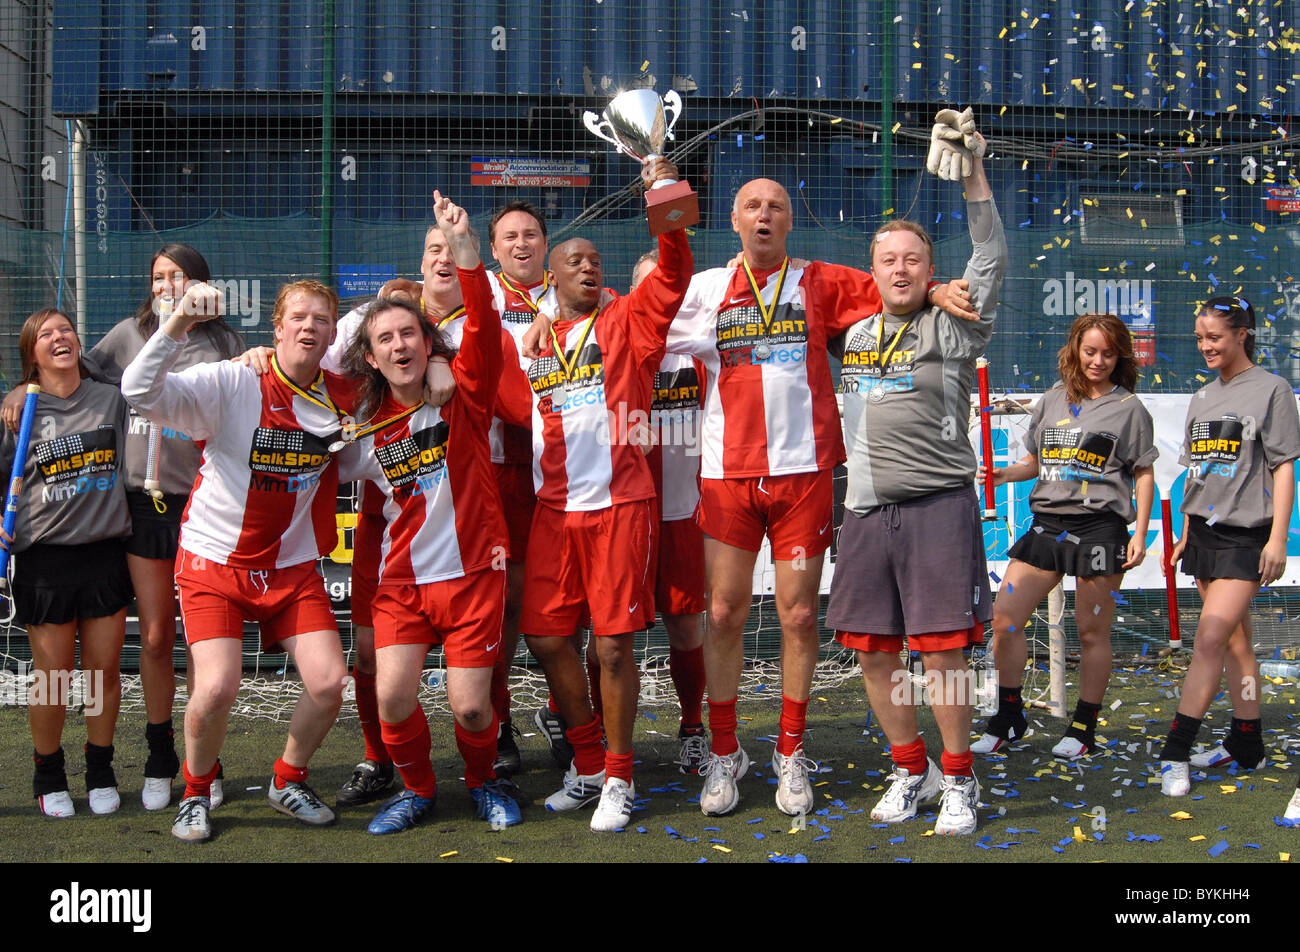 The Winning team were the drivetime team Talksport football match - former footballers take part in a kichabout as radio's Stock Photo